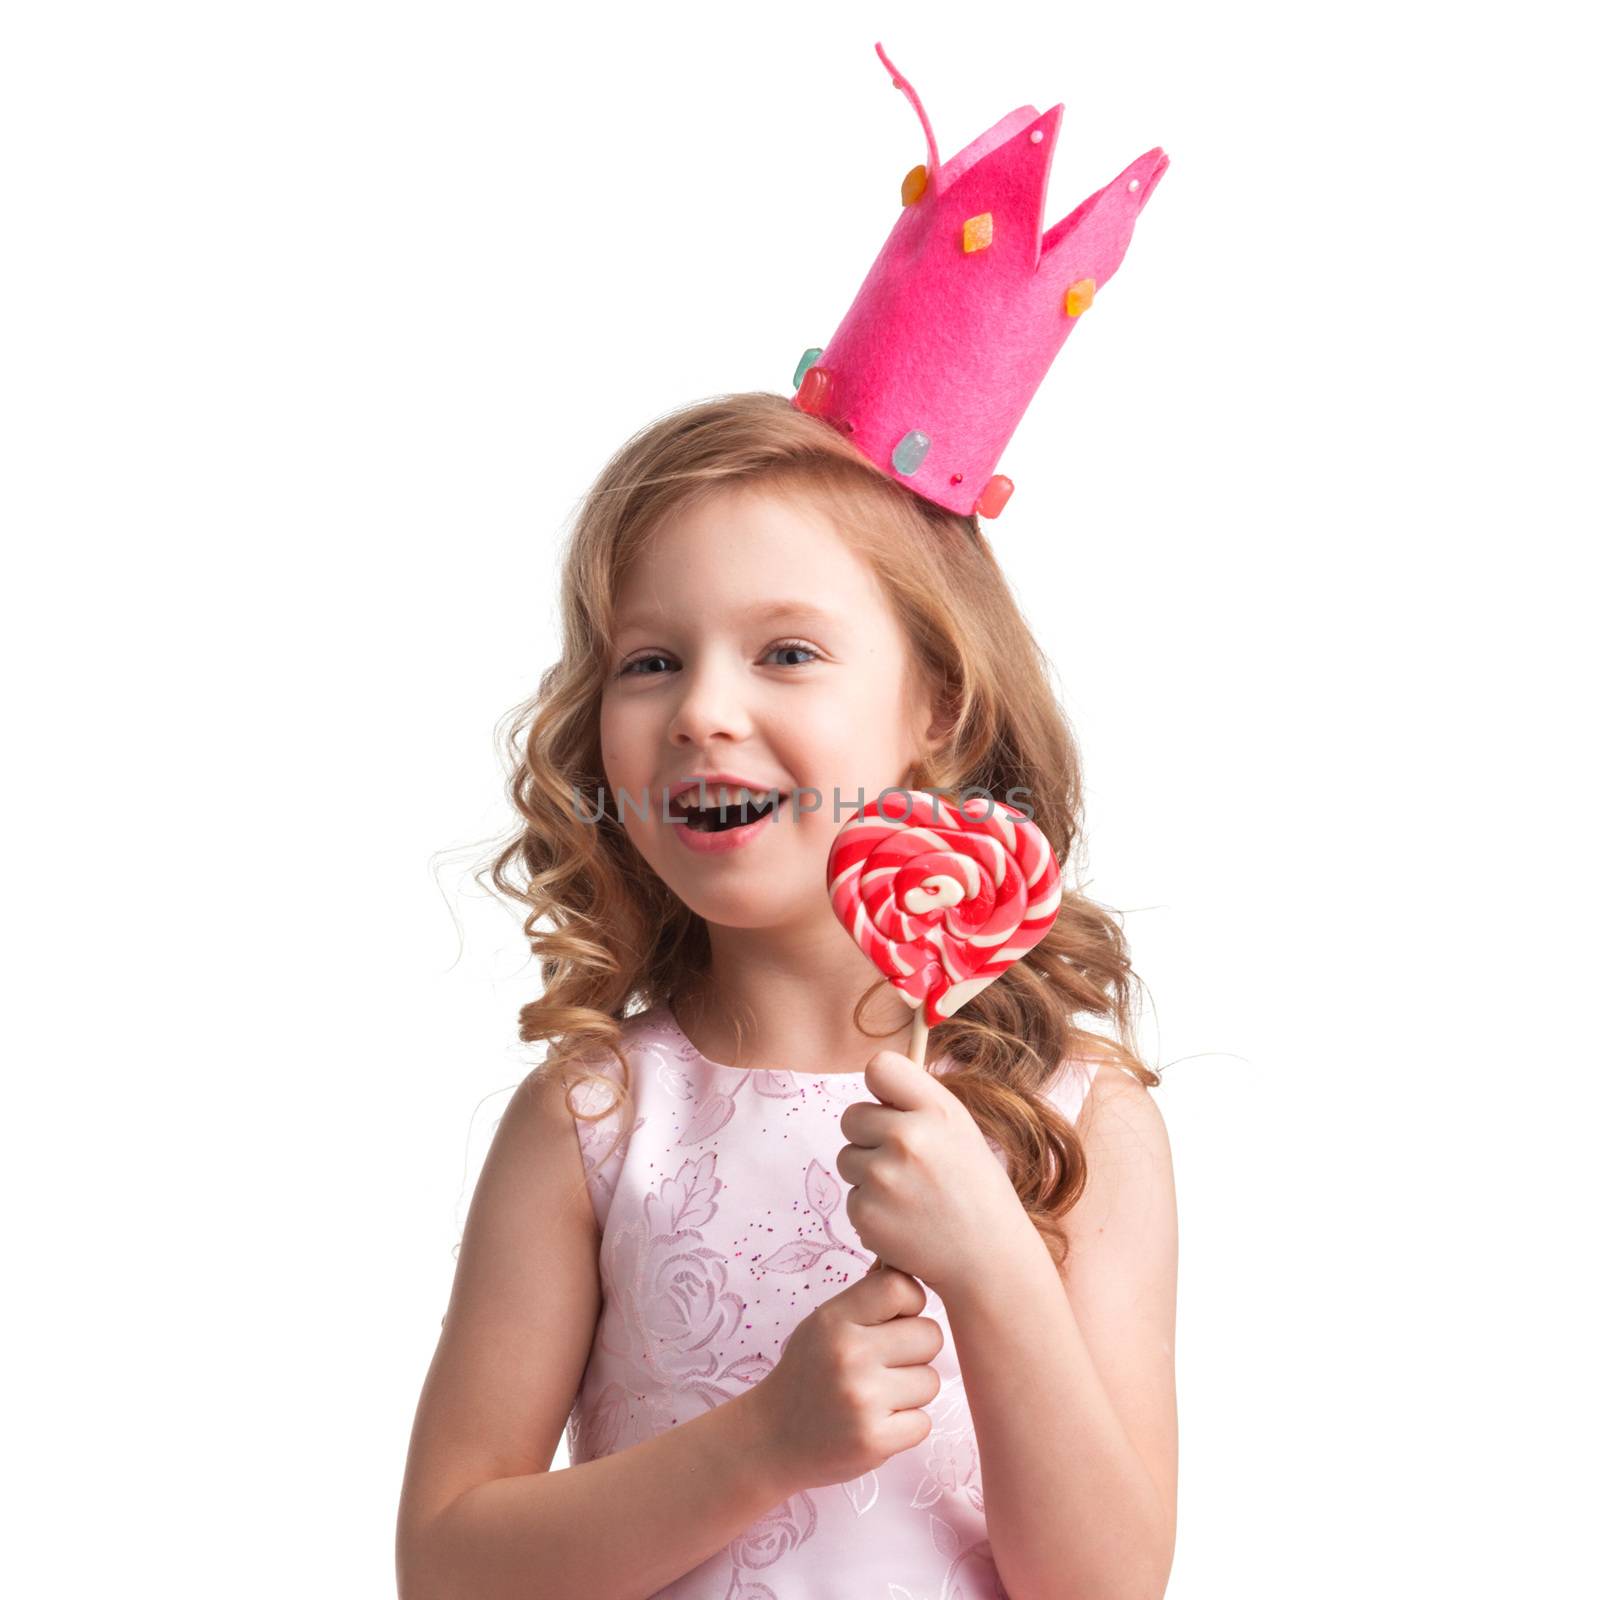 Beautiful little candy princess girl in crown holding big pink heart shaped lollipop and smiling